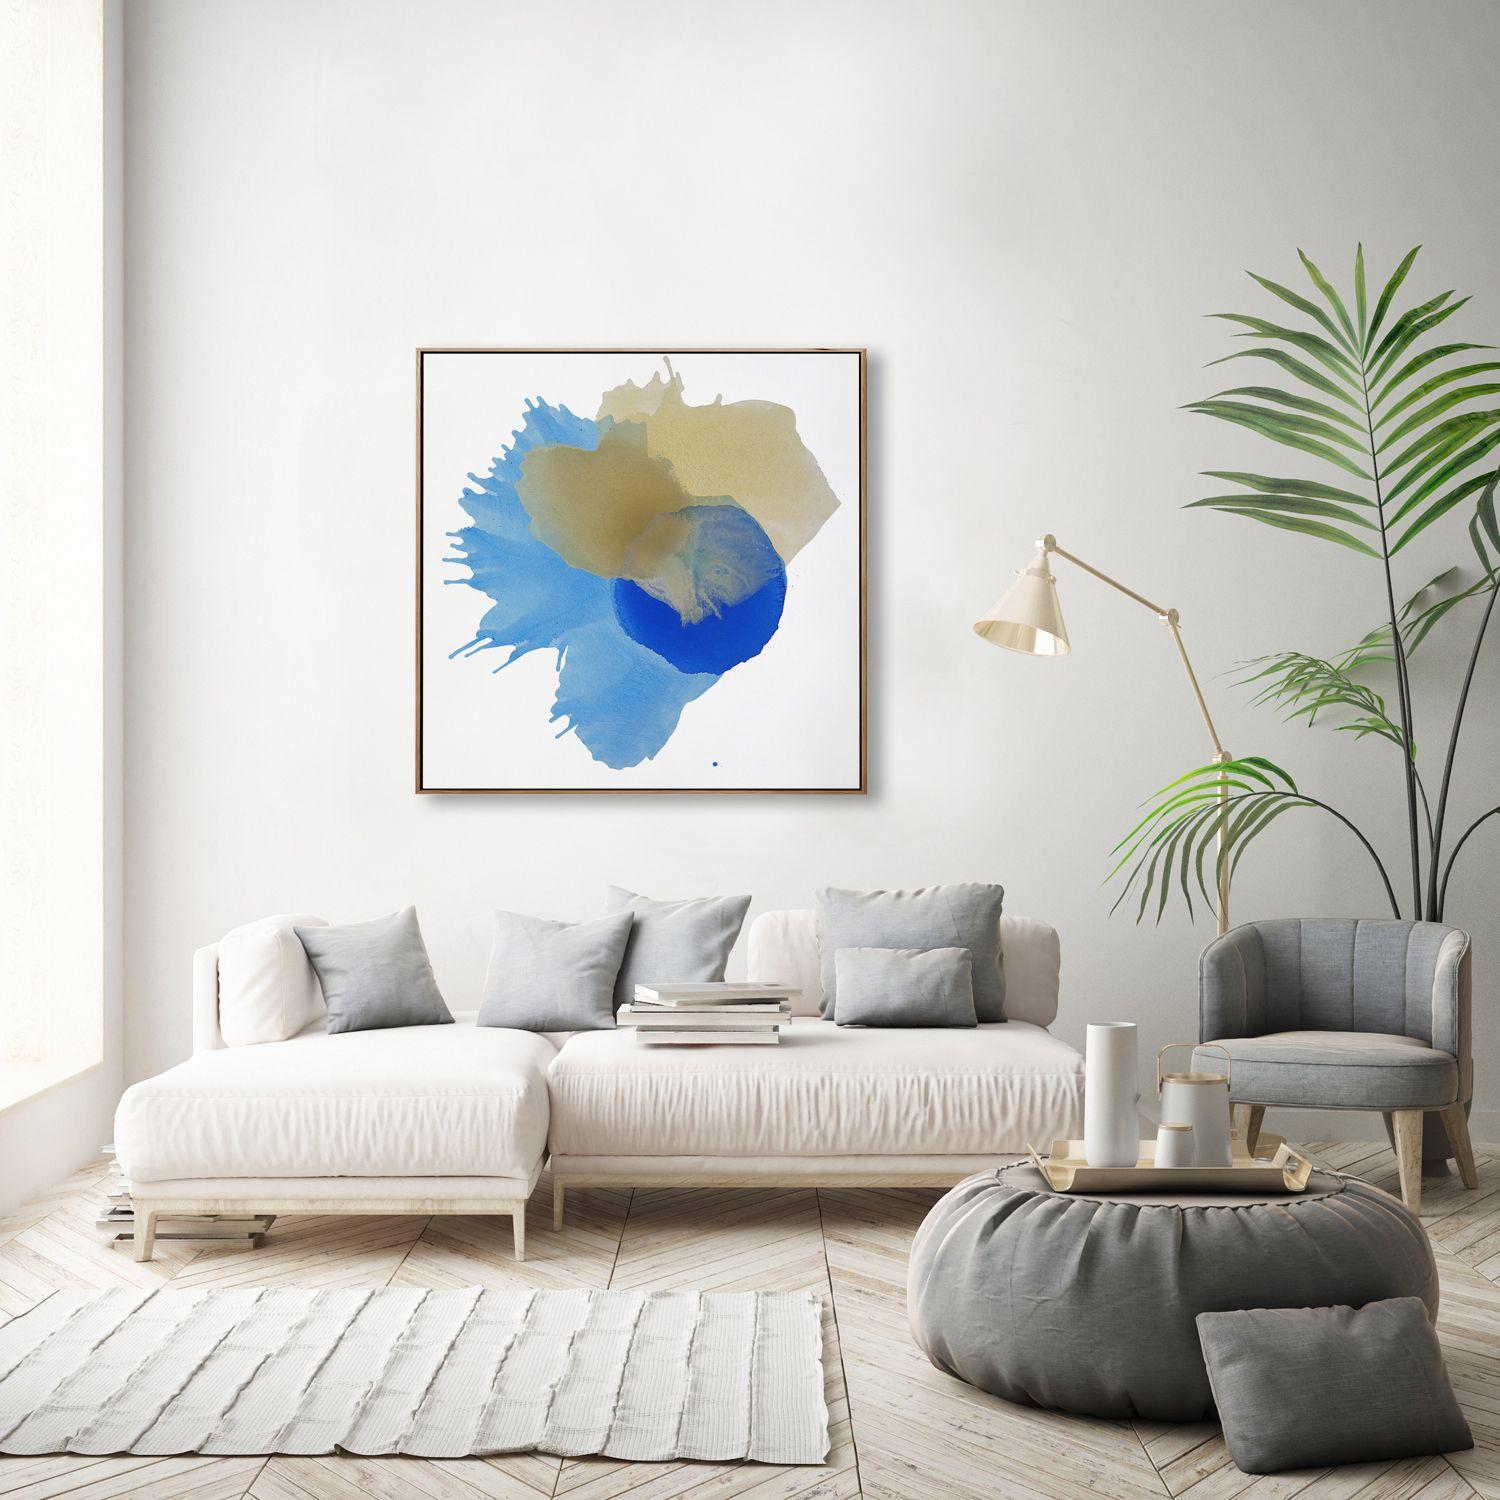 An original abstract painting inspired by a flowing pool. A minimal, soothing yet vibrant piece featuring delicate veils of translucent paint.     -- Includes --  *One original painting, unframed  *Signed on the back     -- Details --  *Acrylic on